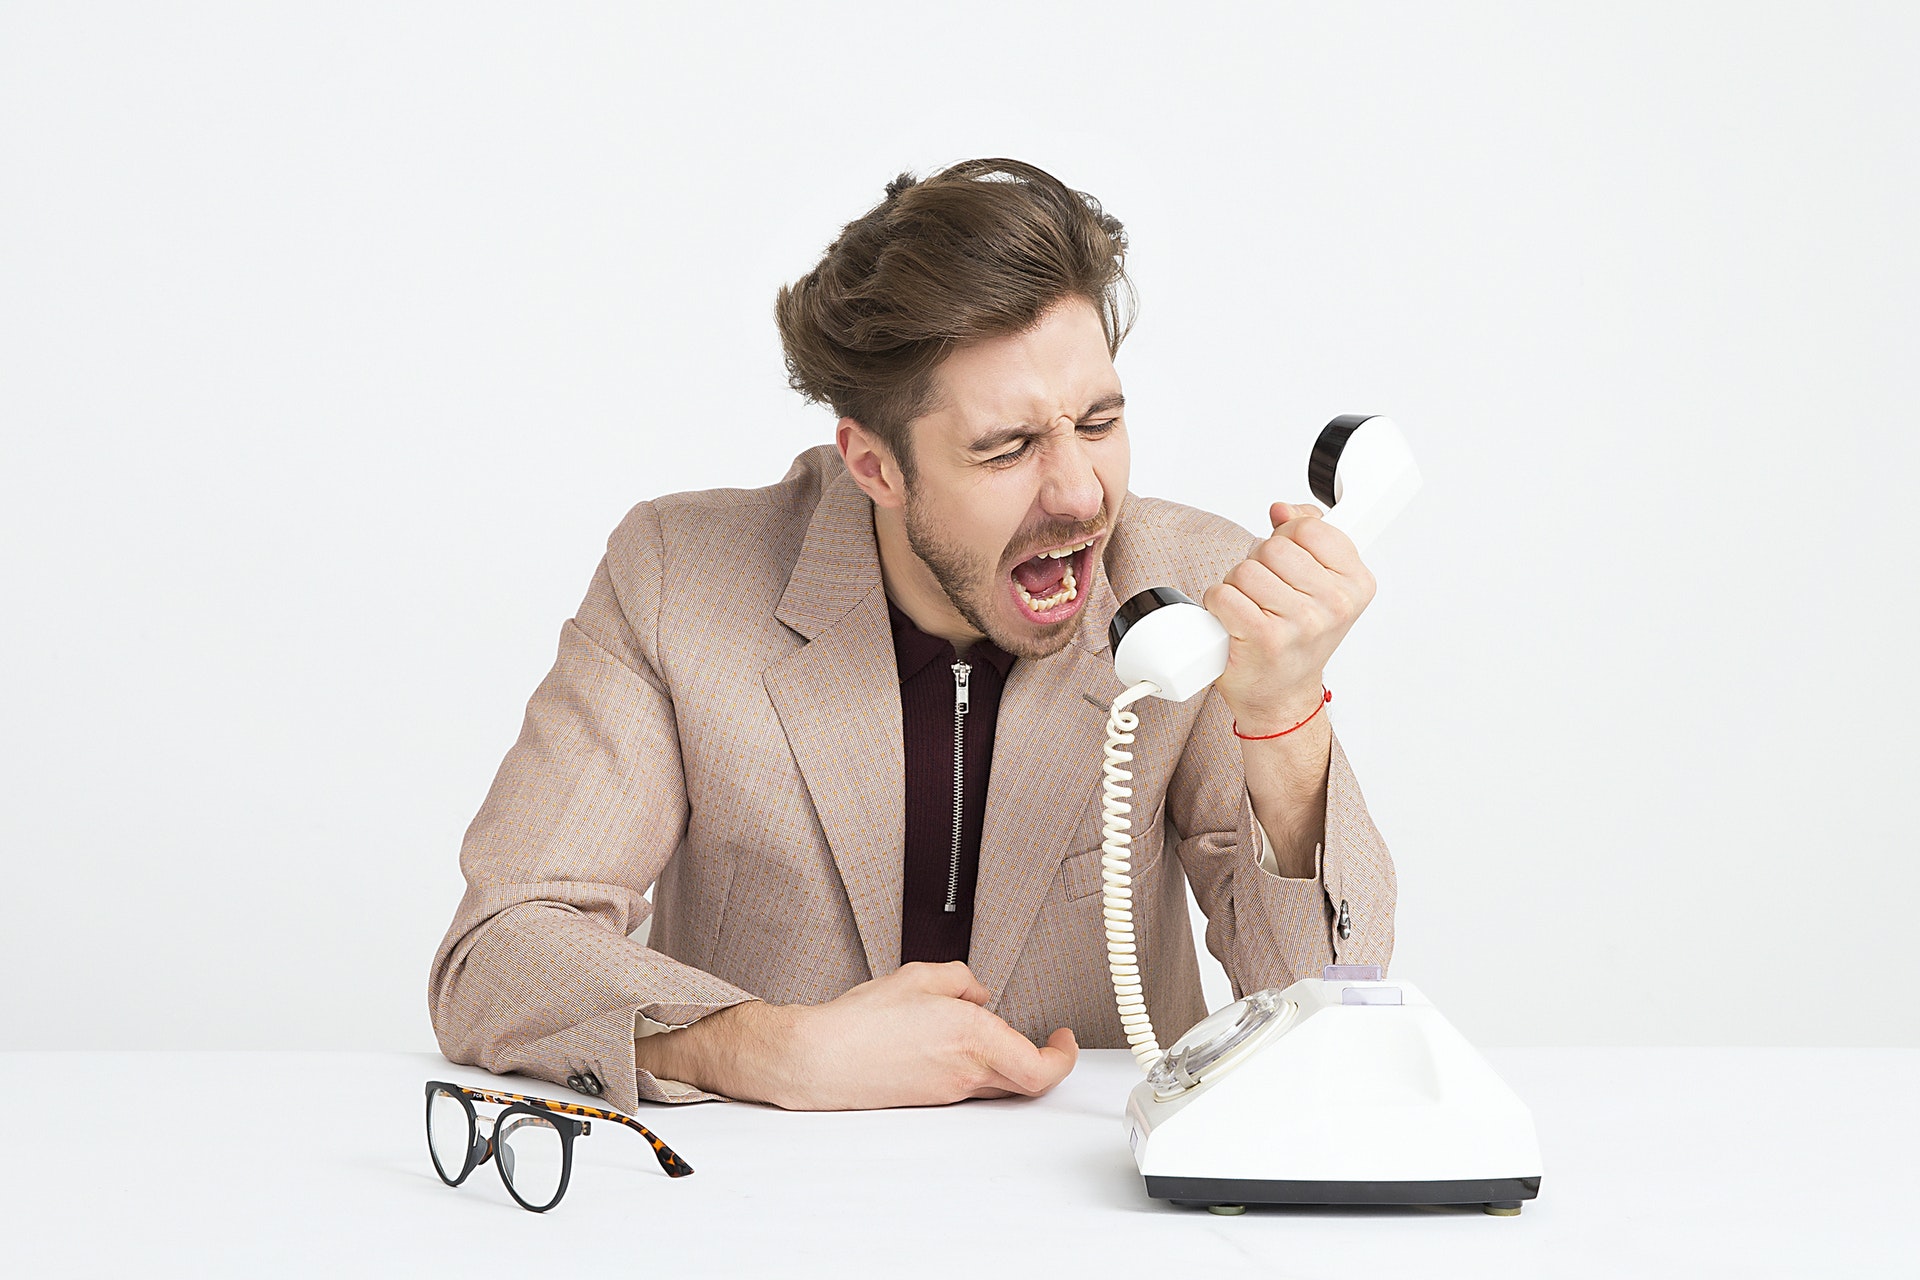 man shouting down the phone - how to handle rude people